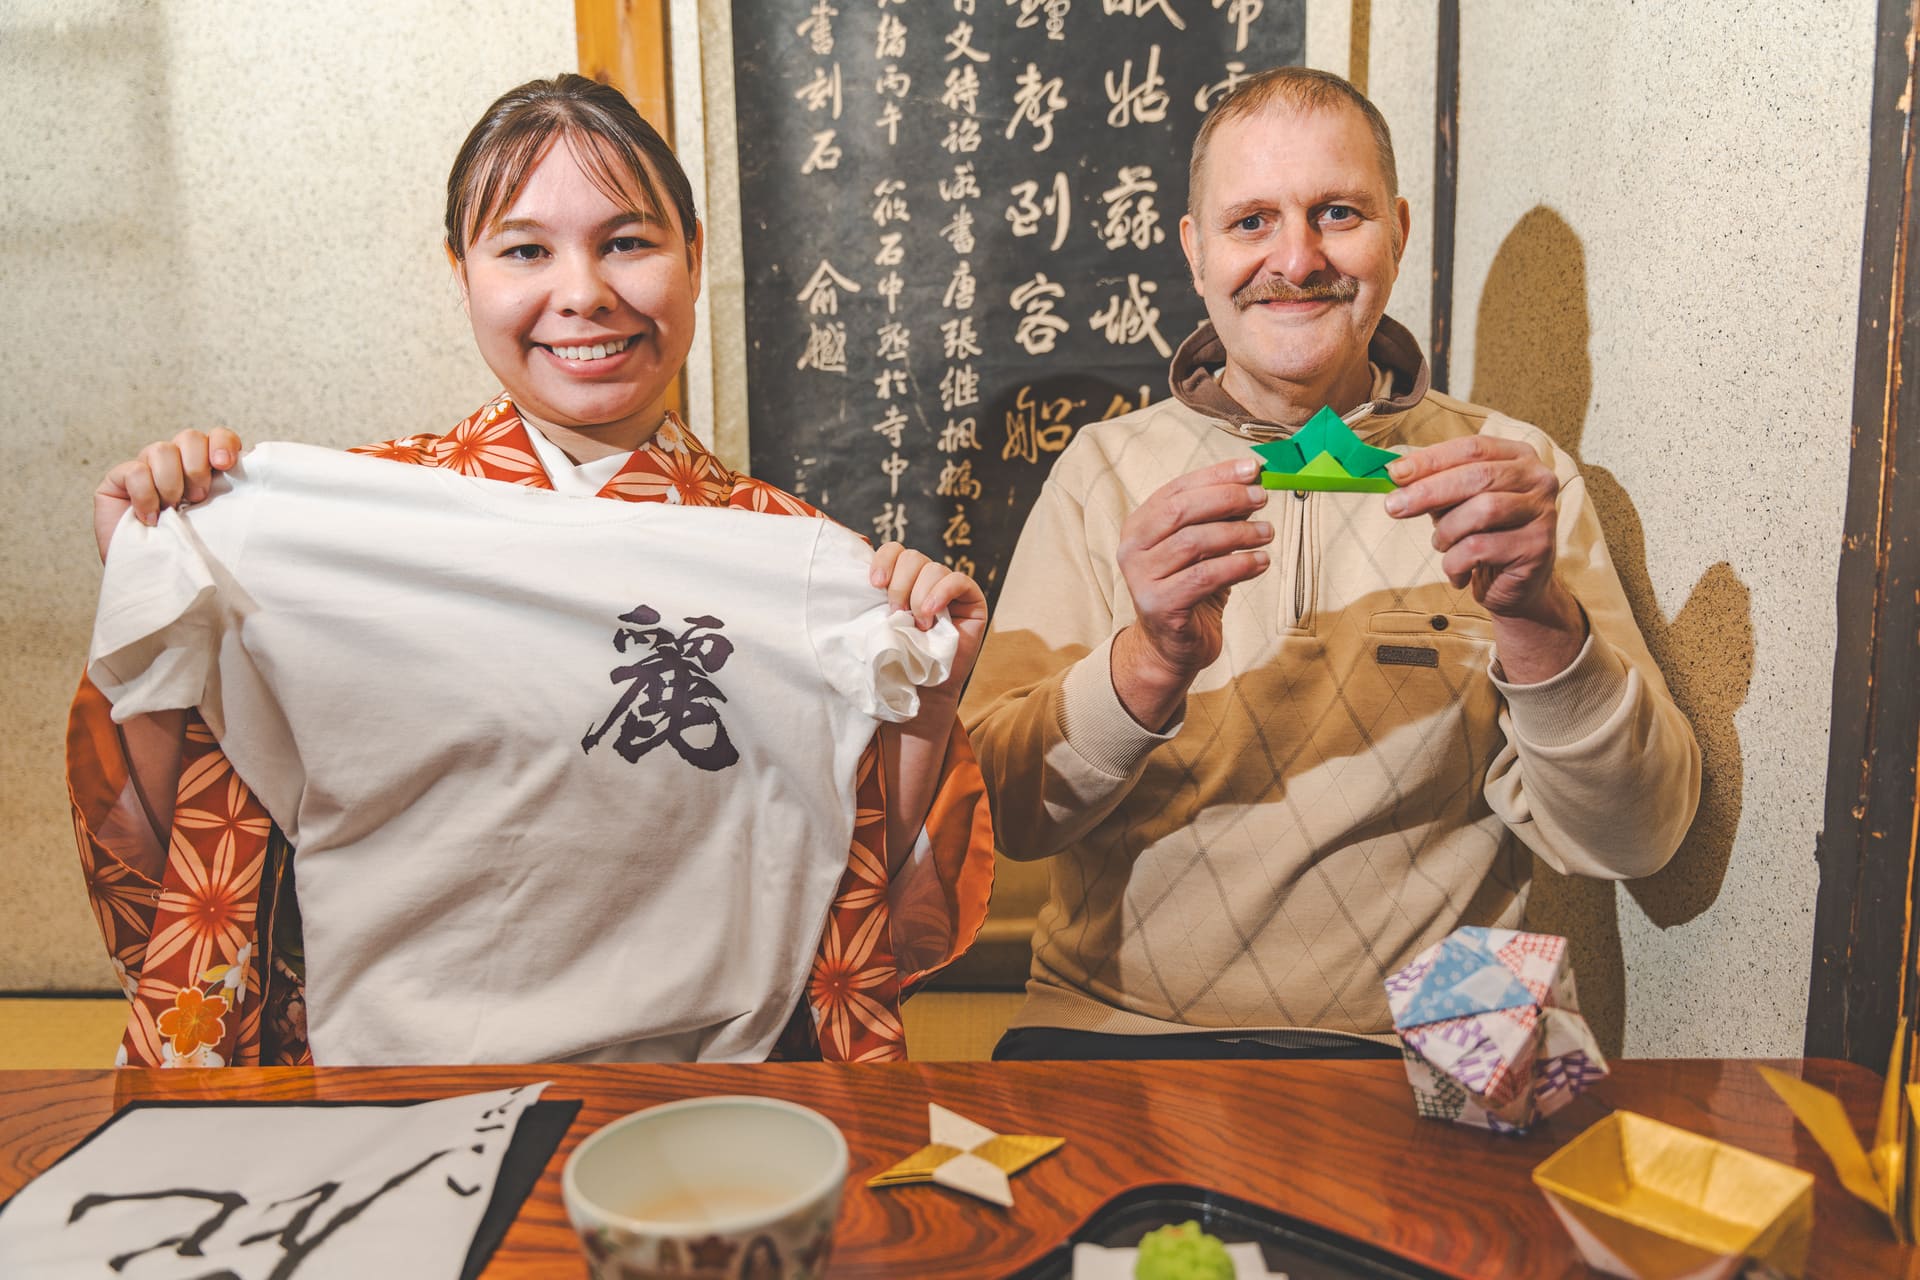 Japanese Cultural Experiences at Kyoto Abeya. A woman in a kimono and a man in a sweater holding a white T-shirt with the character '愛' and a green origami crane, with a blackboard filled with Japanese calligraphy in the background.